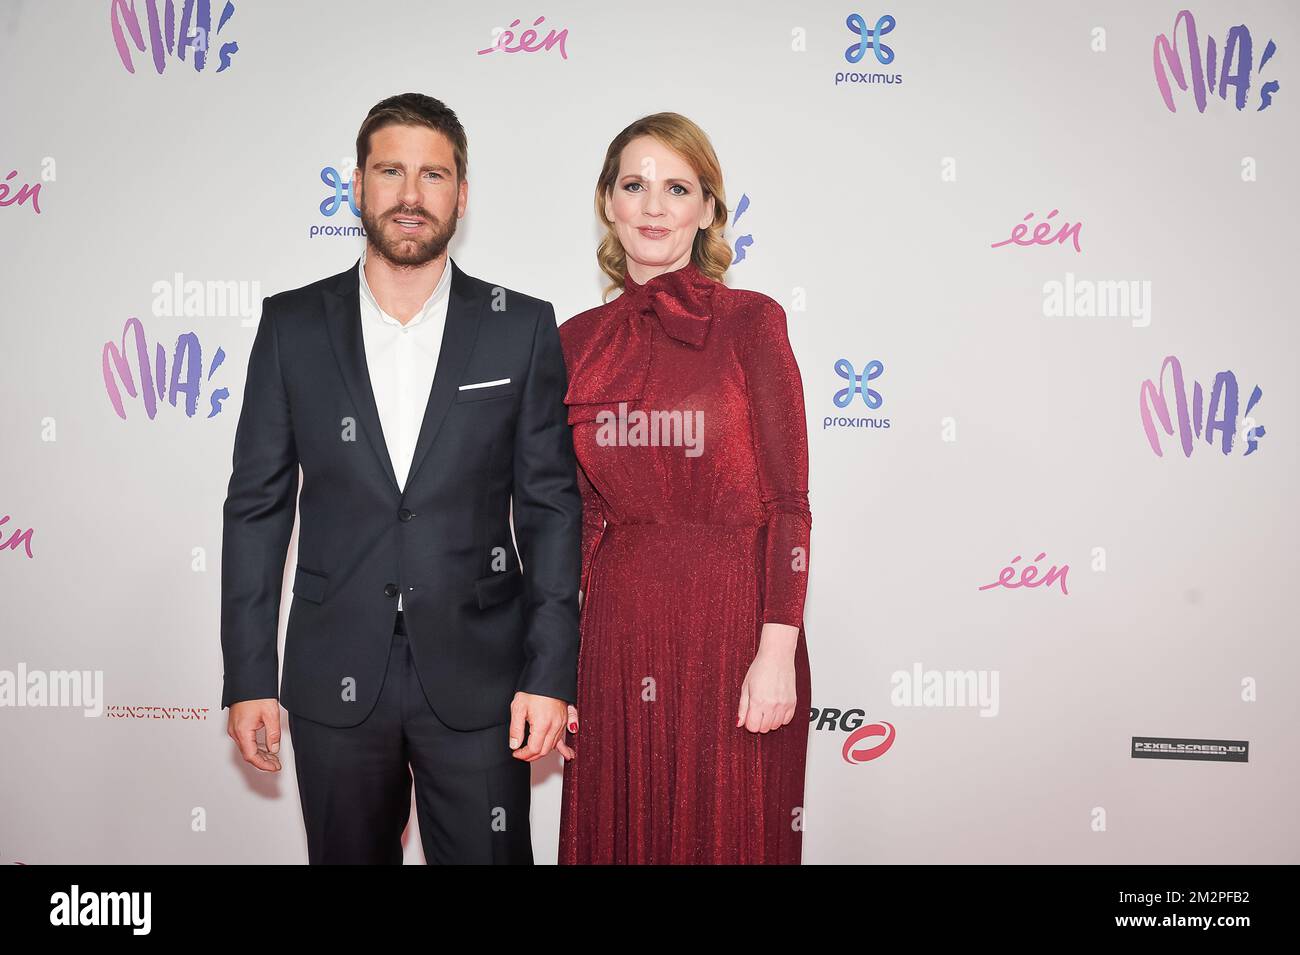 Actor Kevin Janssens and Actress Maaike Cafmeyer pictured during the 12th edition of the MIA's (Music Industry Award) award show, in Brussels, Thursday 07 February 2019. The MIA awards are handed out by the VRT and Kunstenpunt. BELGA PHOTO JAMES ARTHUR GEKIERE Stock Photo